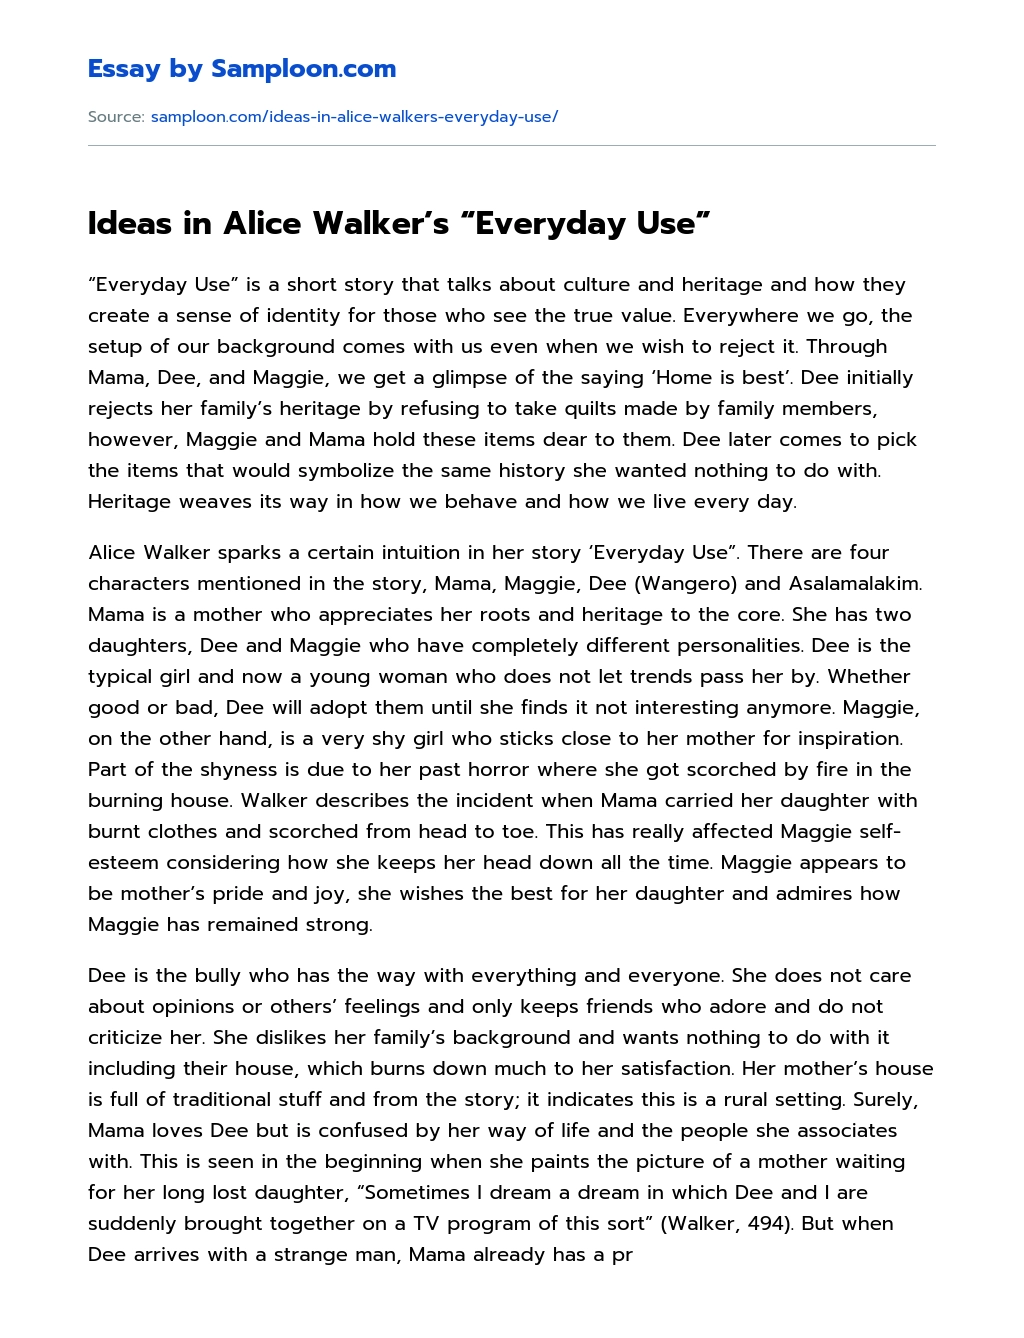 everyday use by alice walker essay